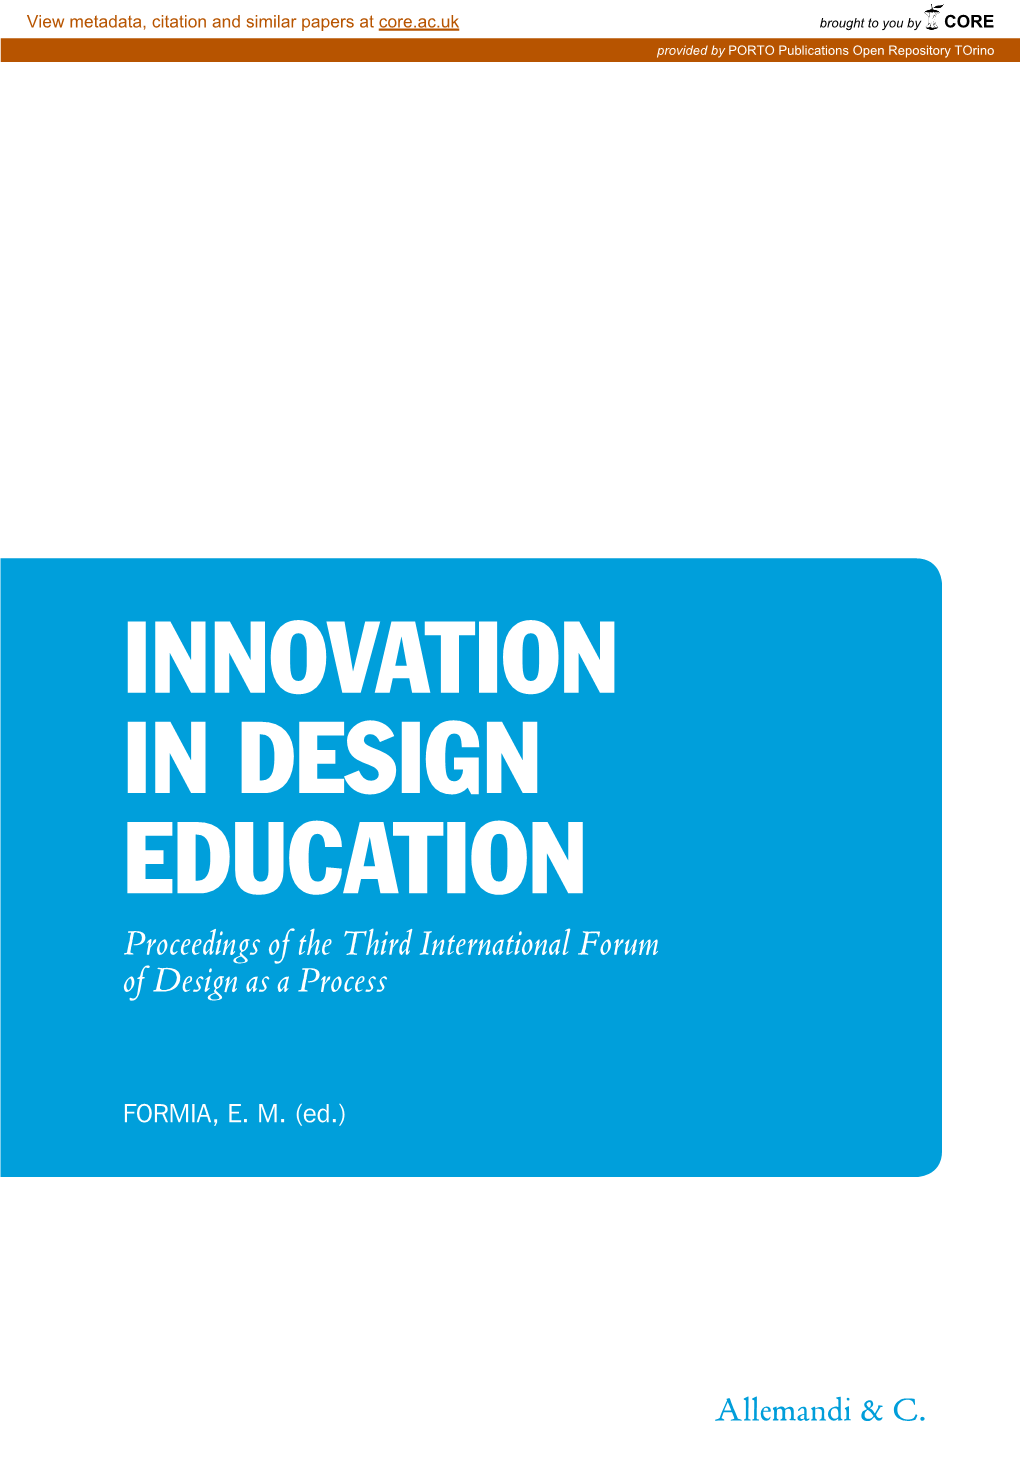 Innovation in Design Education Proceedings of the Third International Forum of Design As a Process